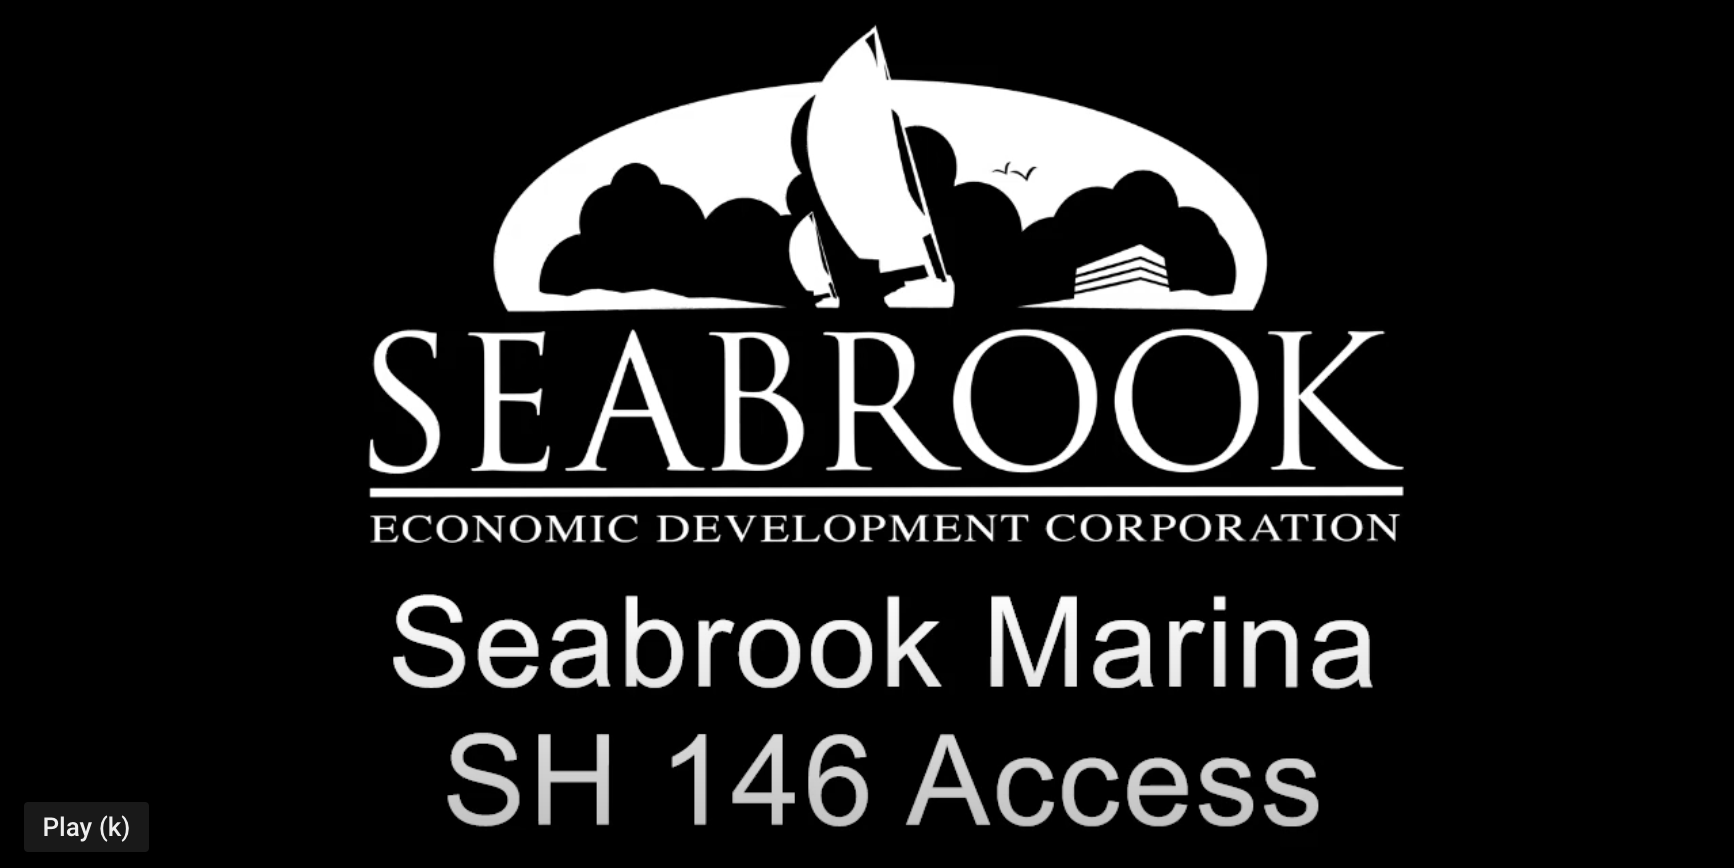 Access to Seabrook Marina & Shipyard and New Restaurant - Drone Videos